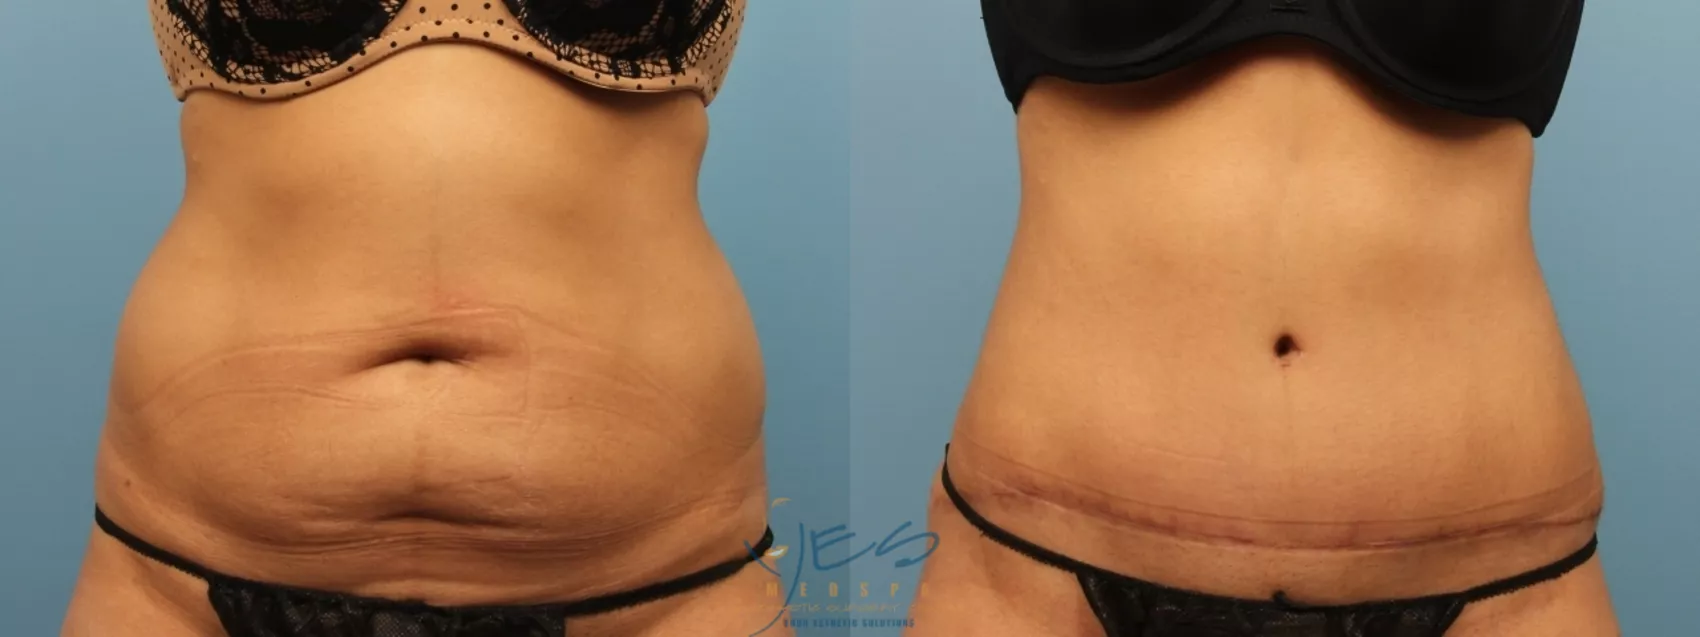 Patient #5745 Tummy Tuck (Abdominoplasty) Small Size Before and